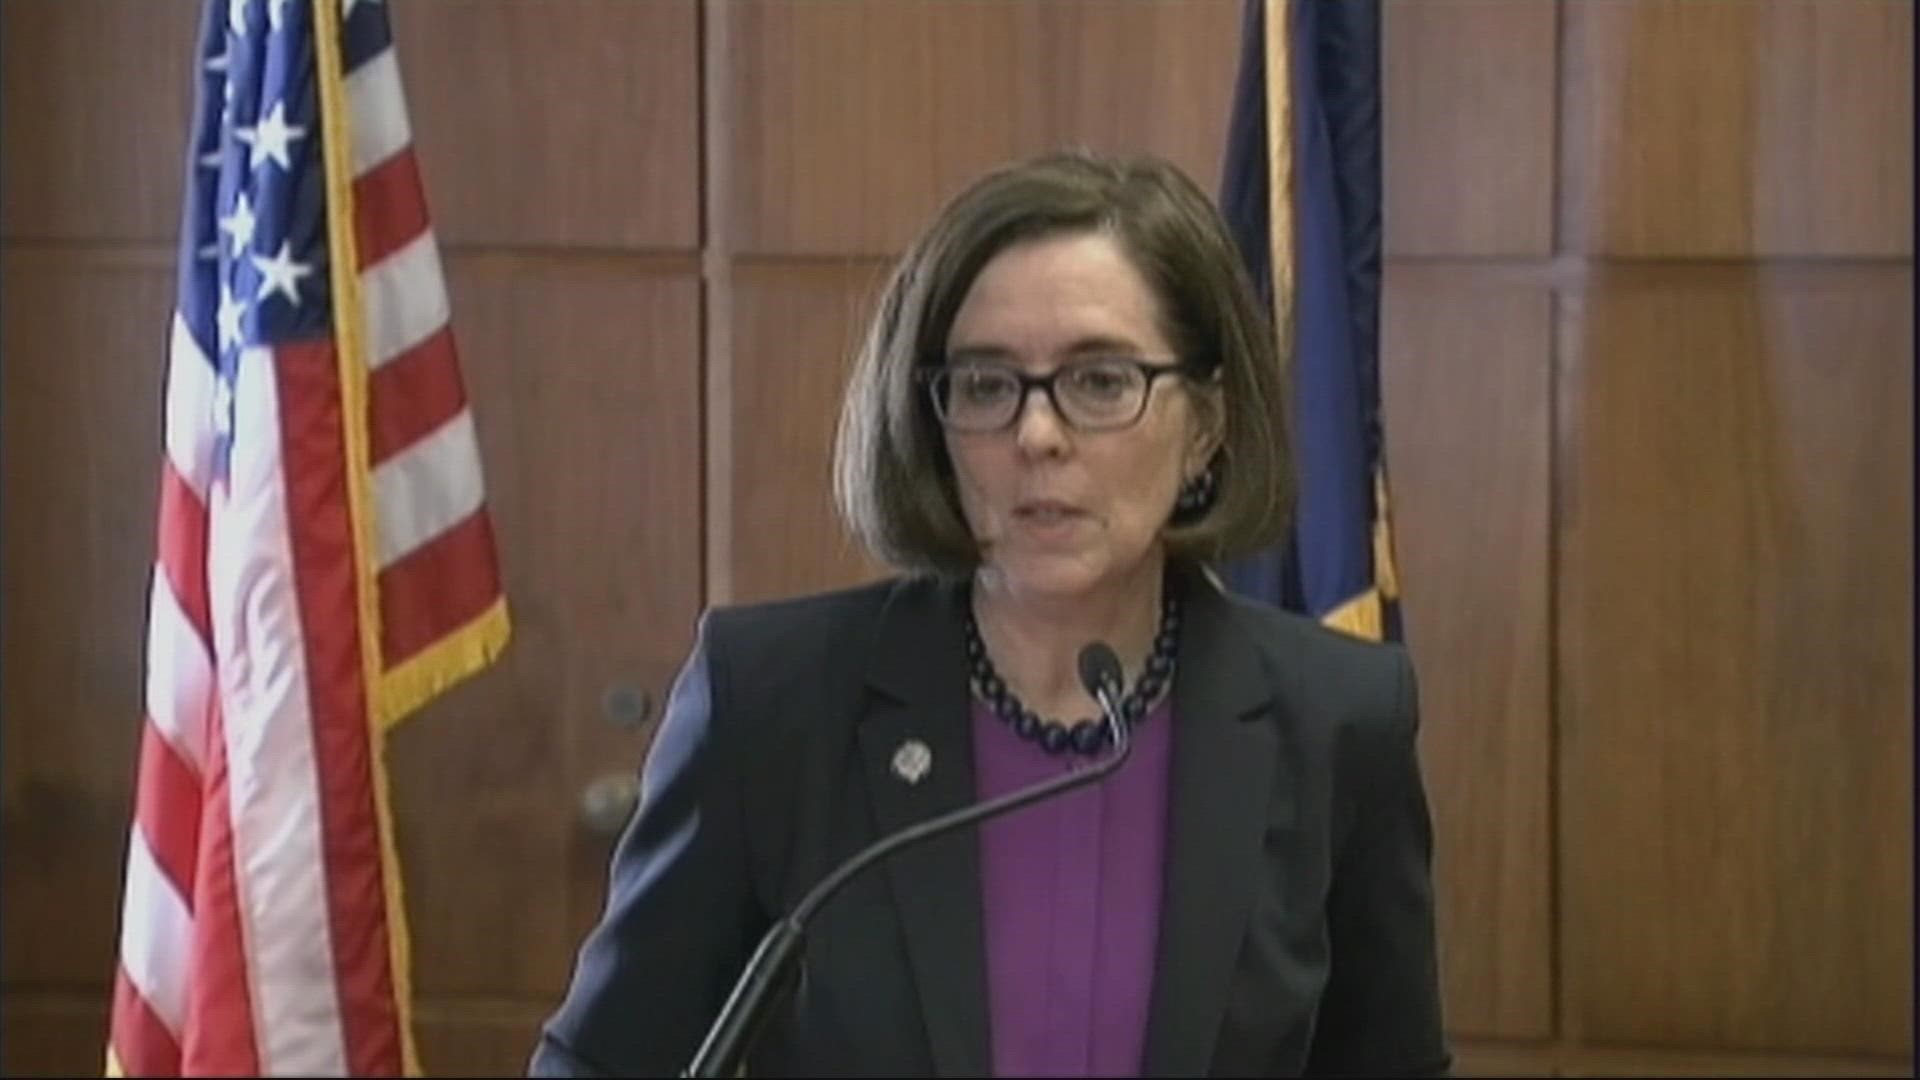 Gov. Kate Brown granted clemency to Kyle Hedquist, who was serving a life sentence without parole after being convicted of murdering Nikki Thrasher when he was 18.